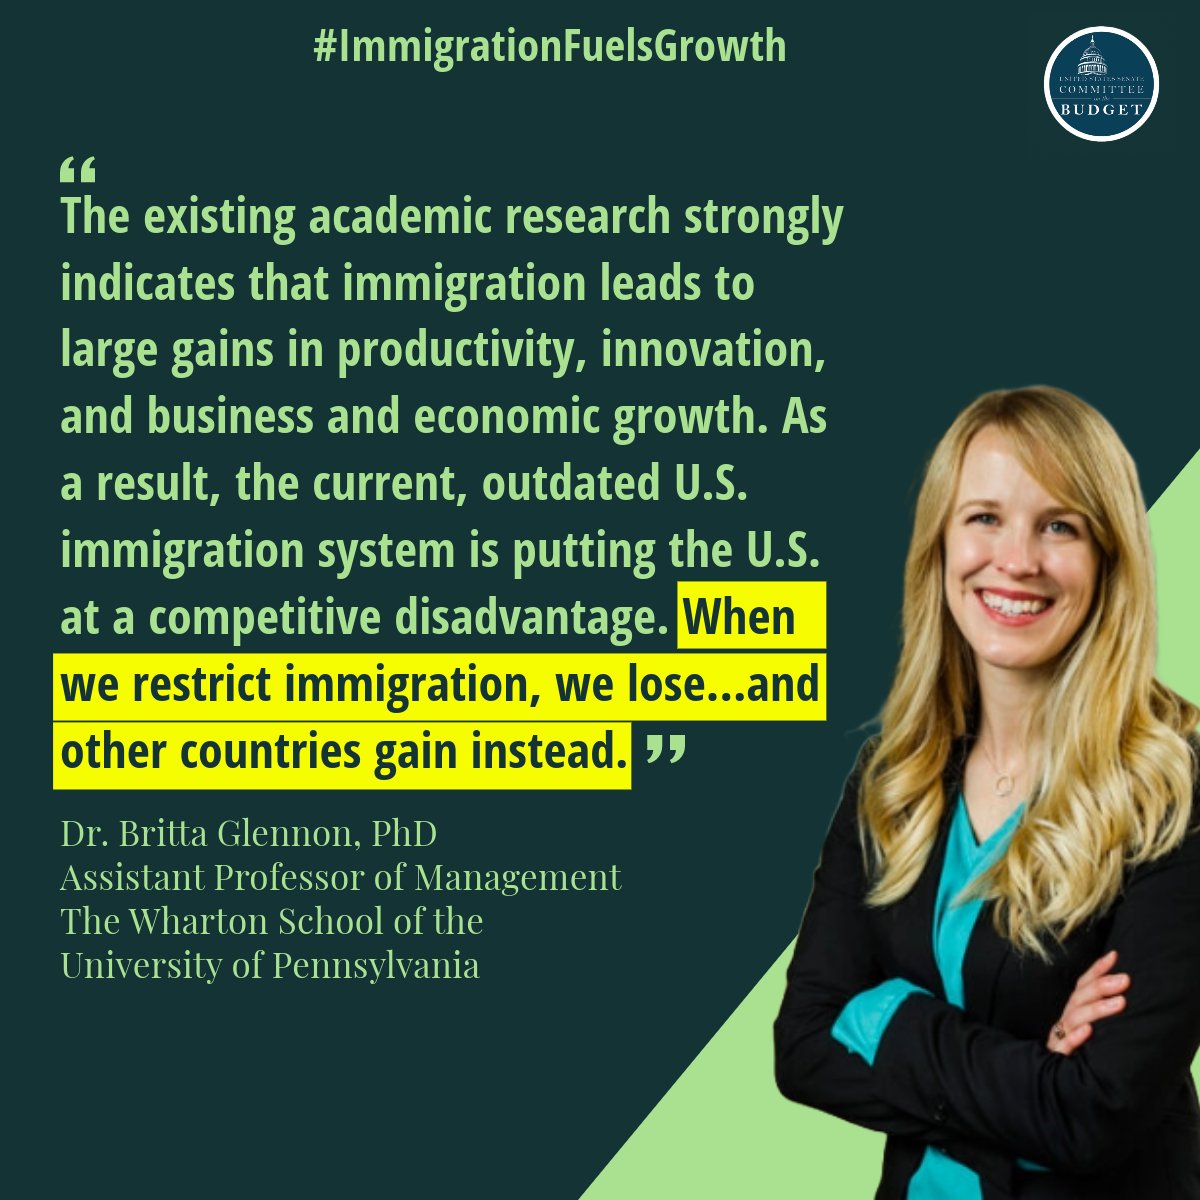 Immigration is integral to America’s future competitiveness. Watch Wharton’s @BrittaGlennon break down how reforming our immigration system can supercharge our economy. budget.senate.gov/hearings/unloc…